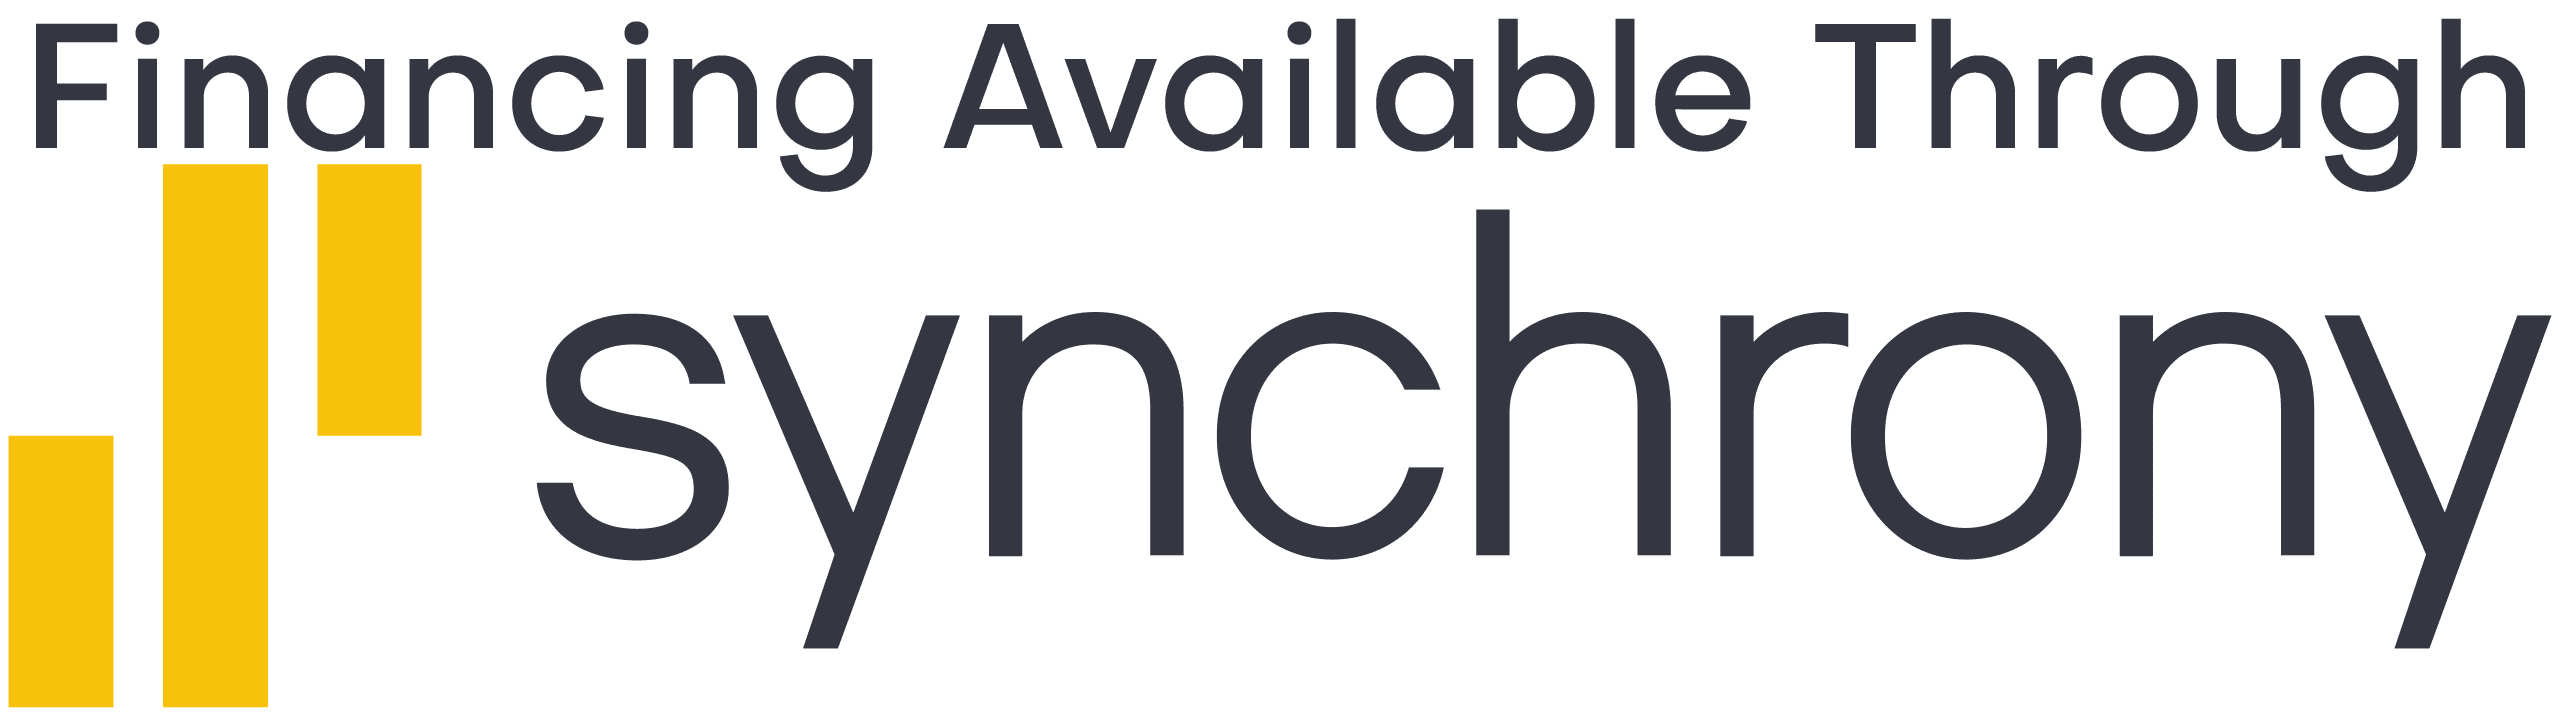 financing available through synchrony